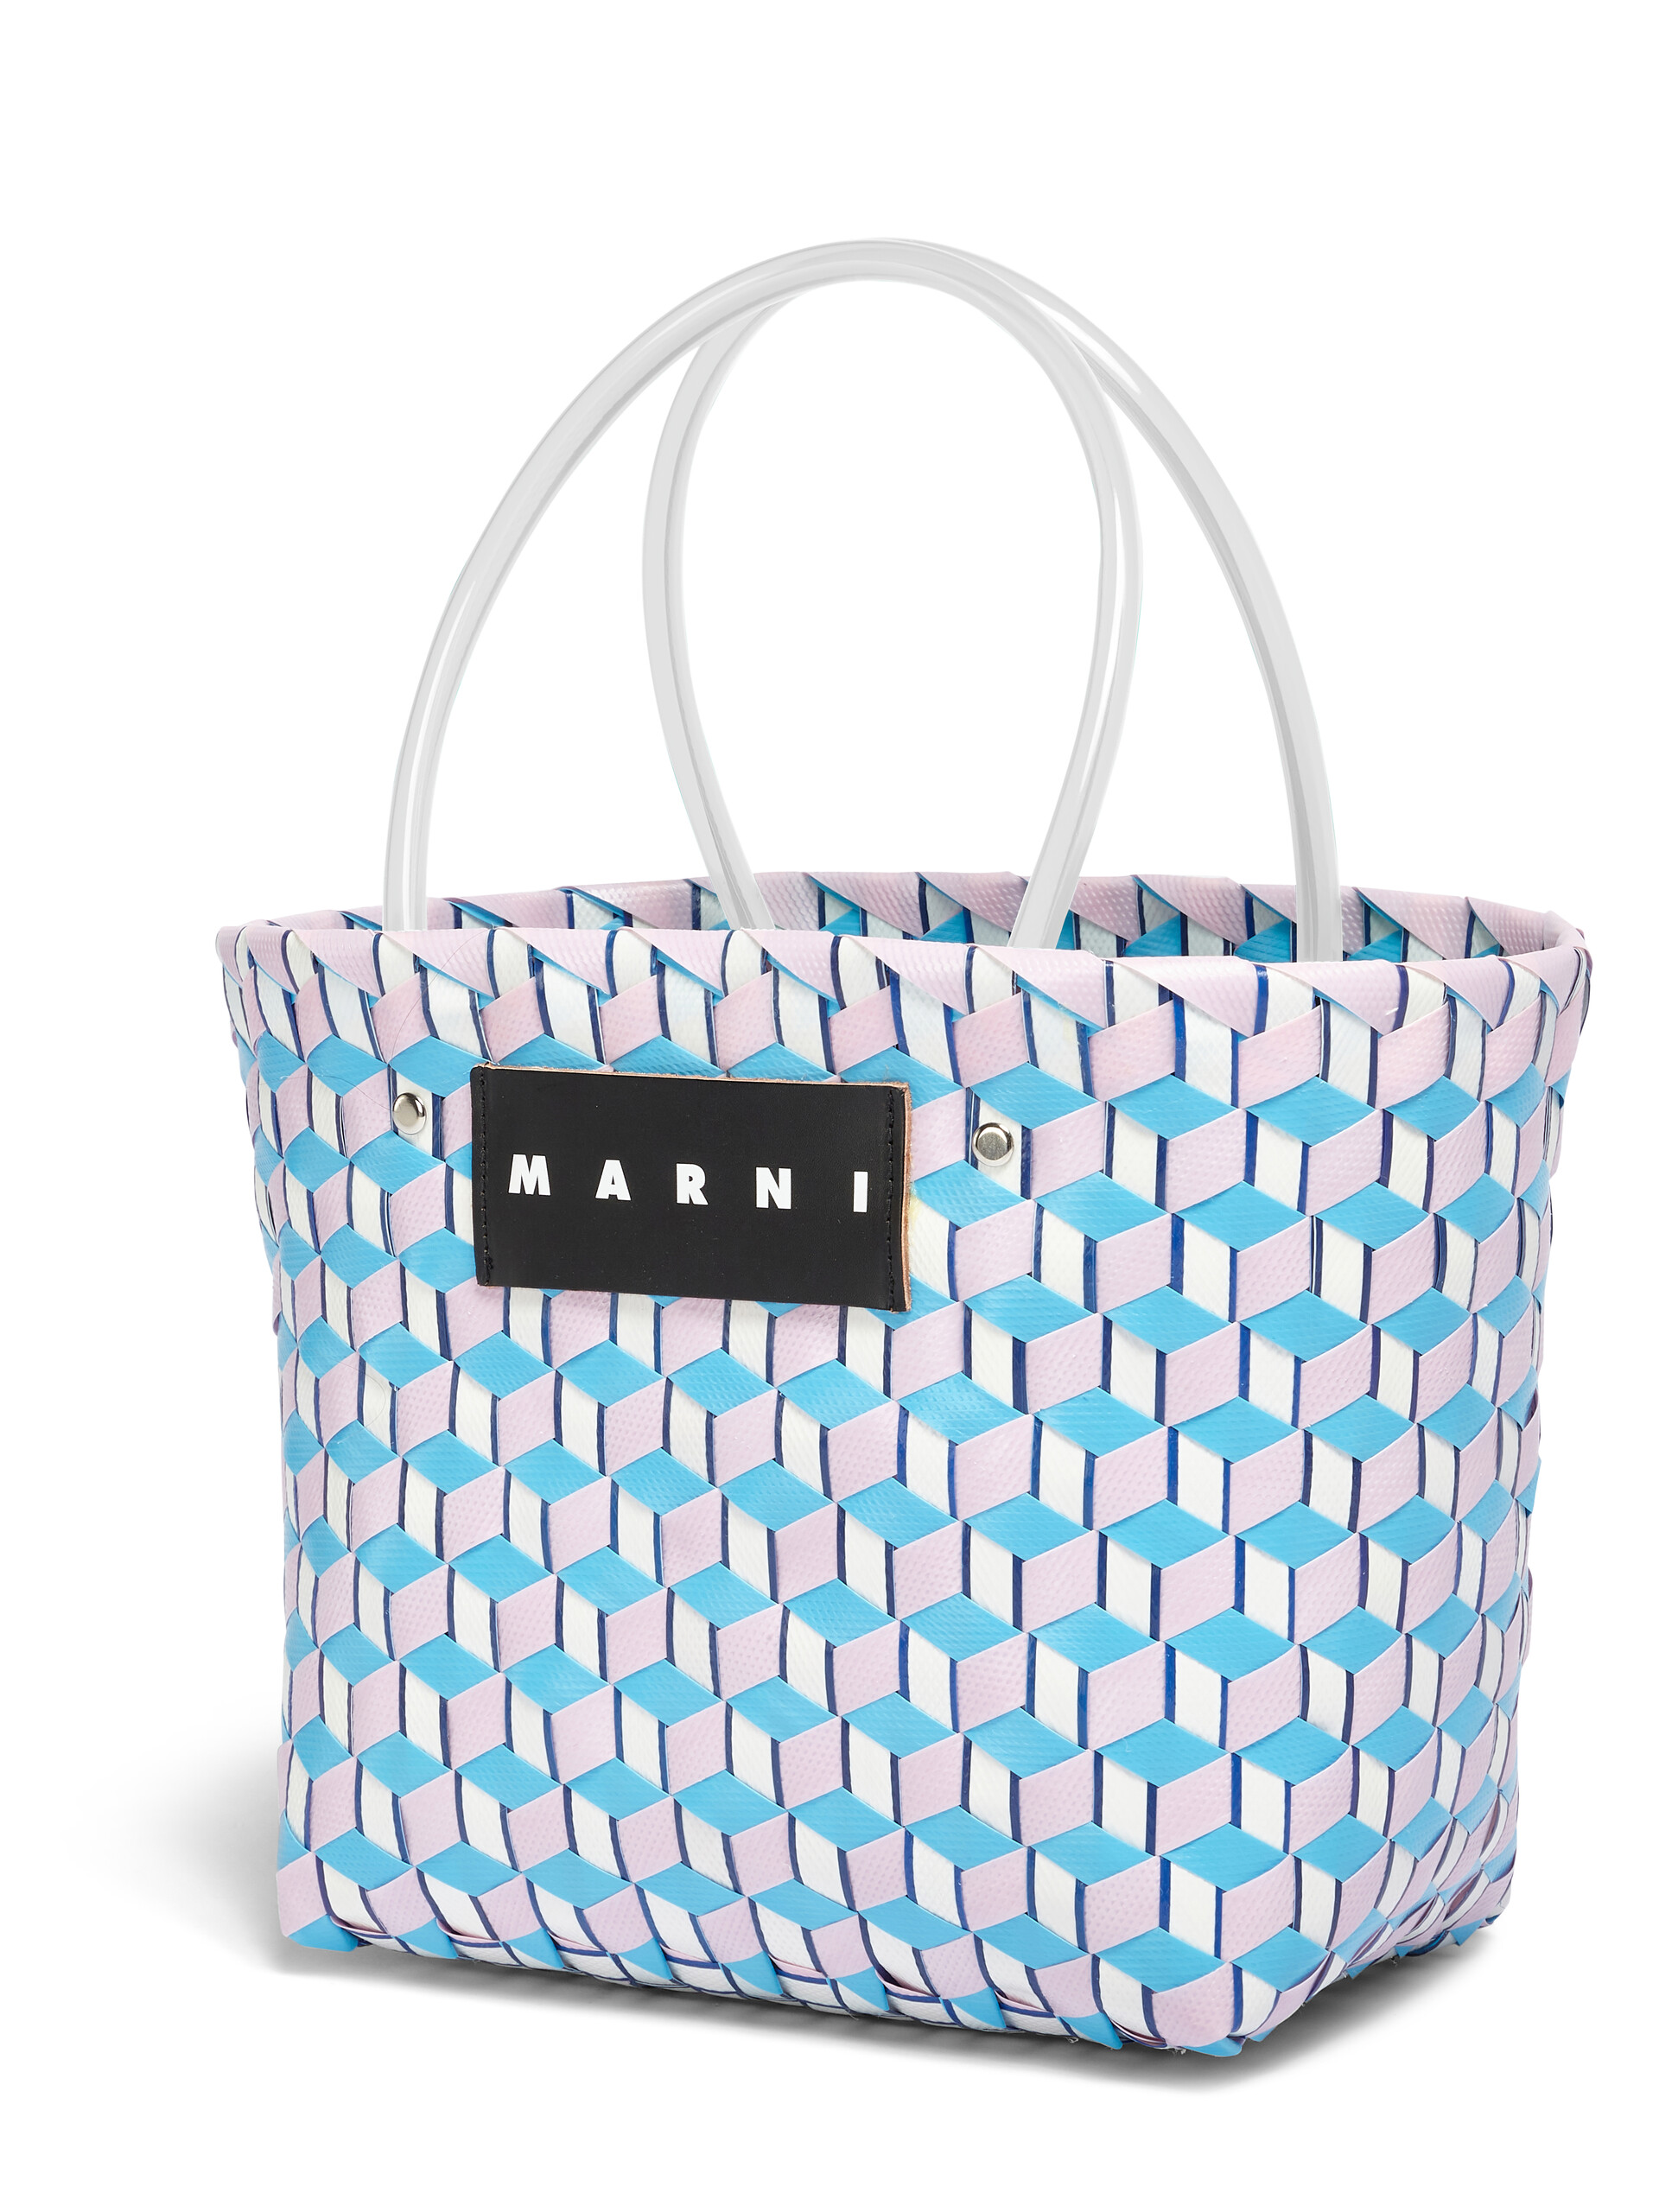 MARNI MARKET 3D BAG in pale blue cube woven material - Shopping Bags - Image 4